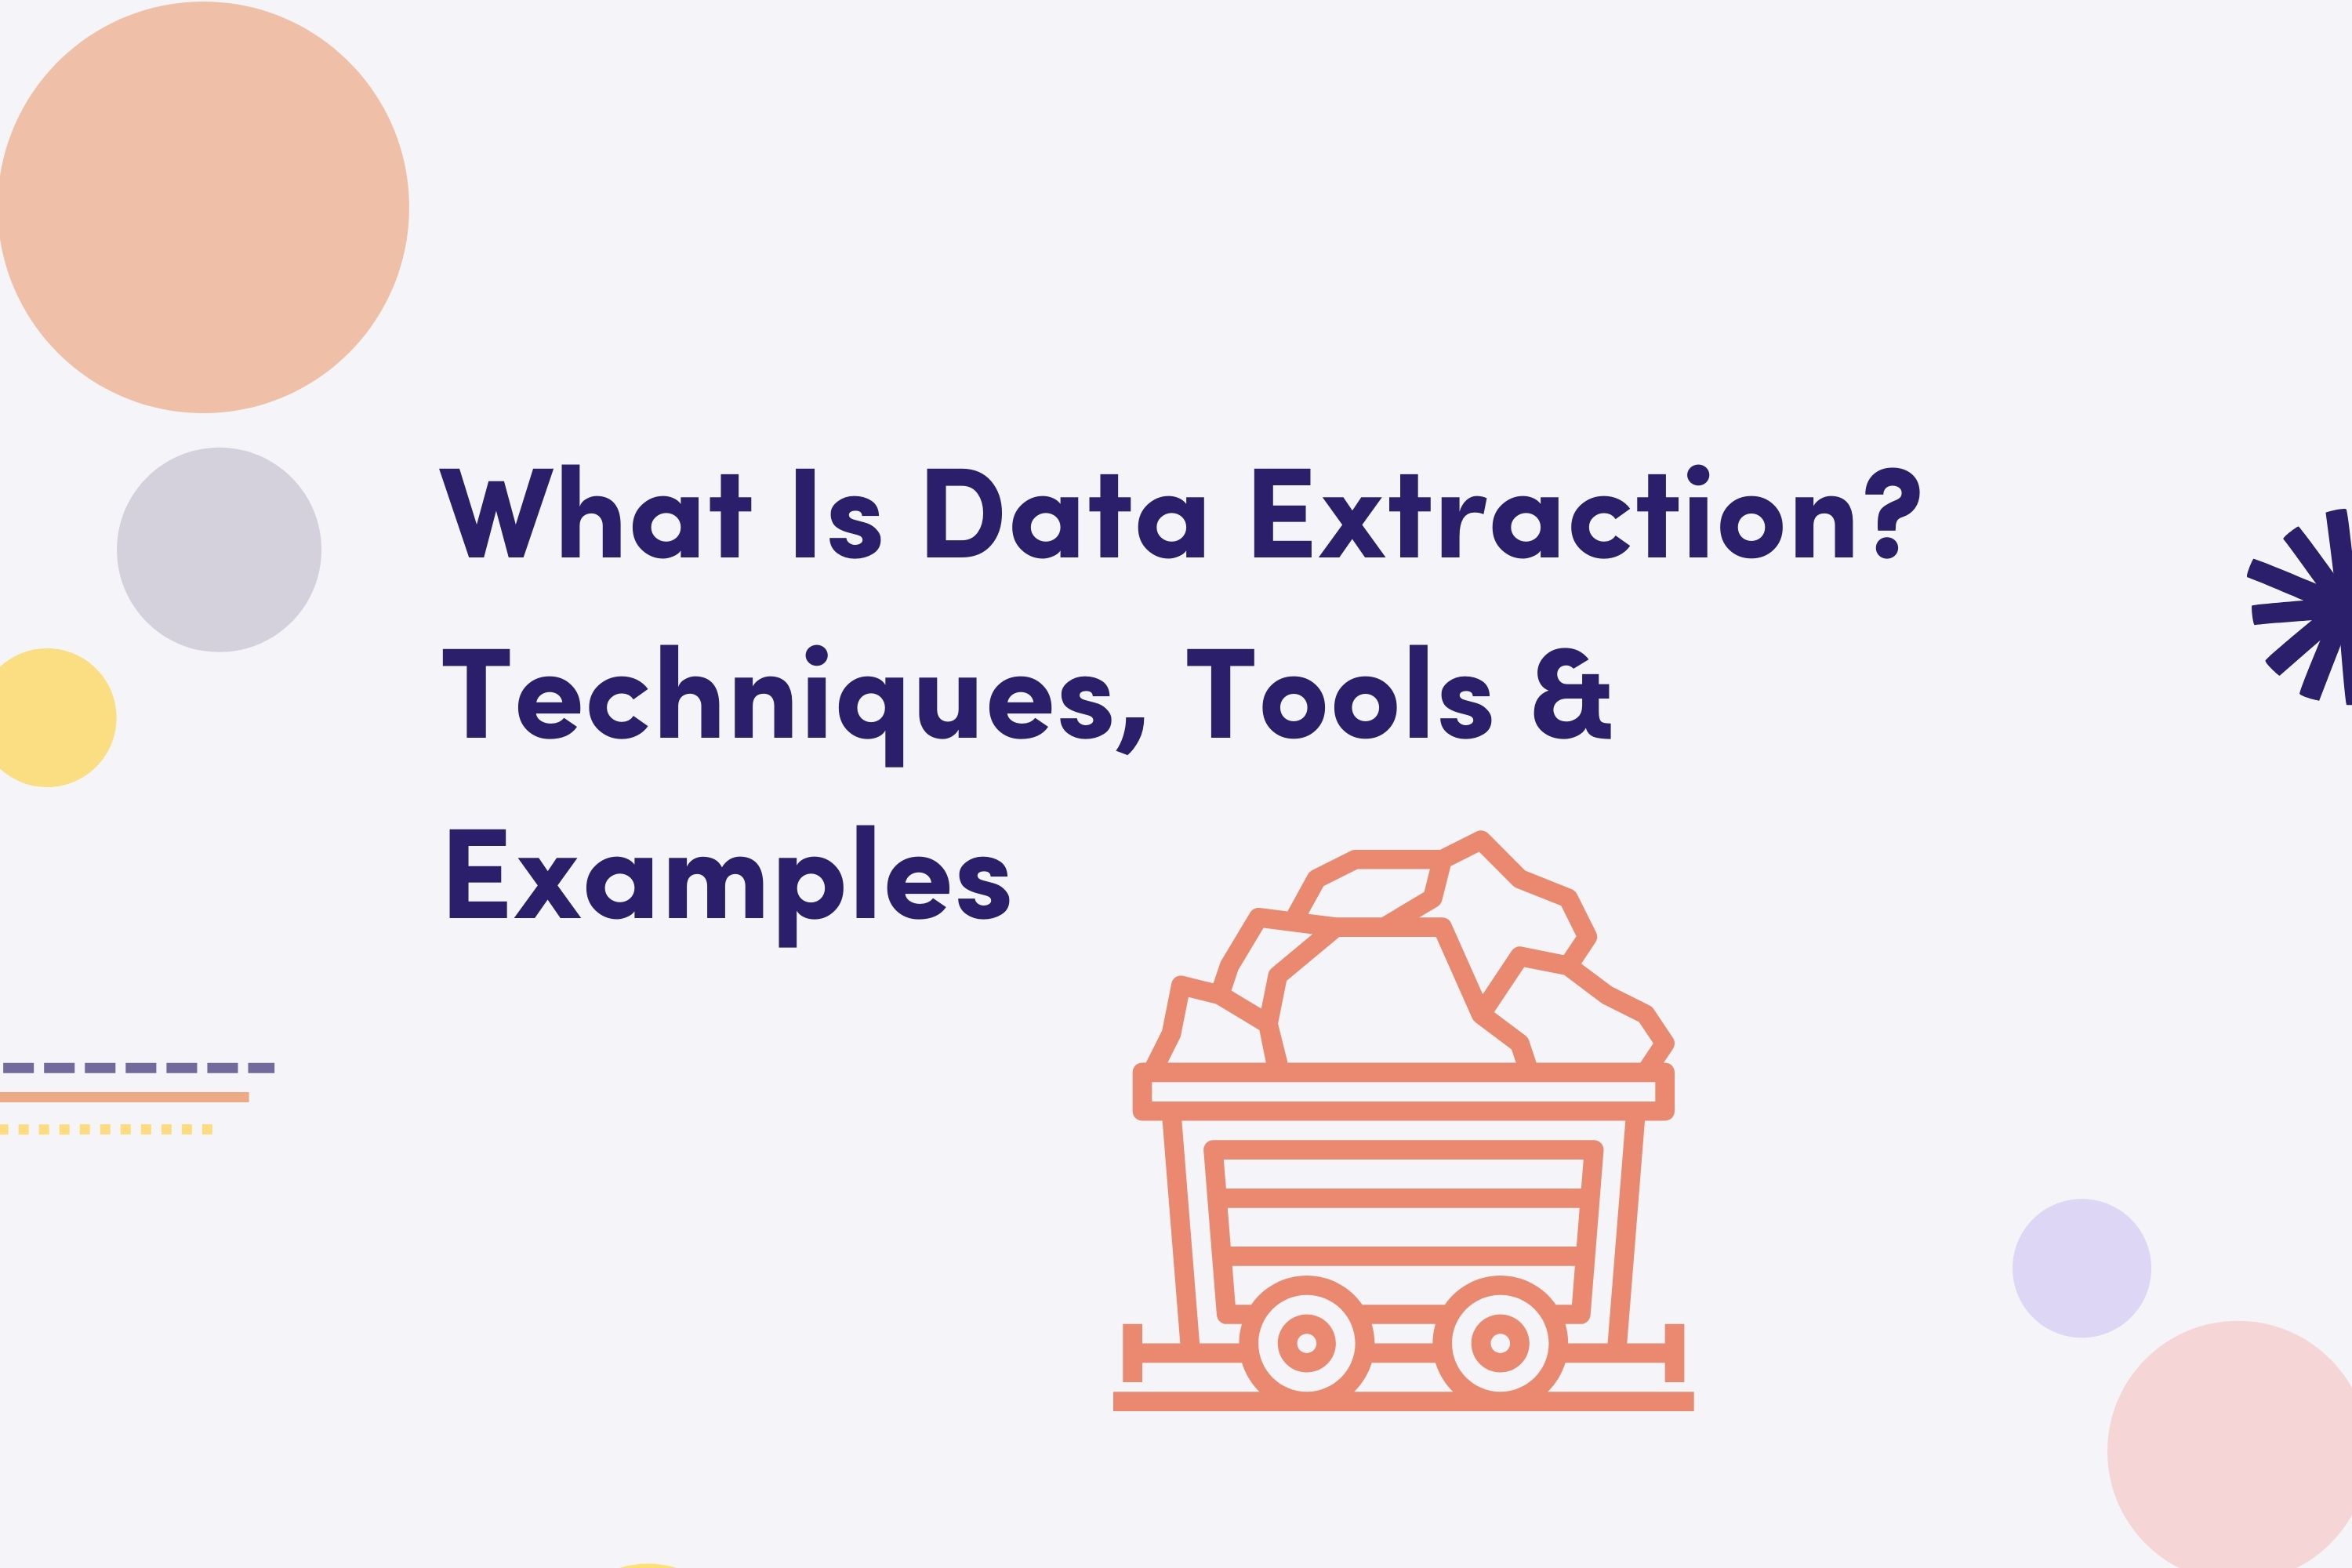 "What Is Data Extraction? Techniques, Tools & Examples" accompanied by an icon of a mining cart full of data, suggesting an educational or informational resource on data extraction methods.